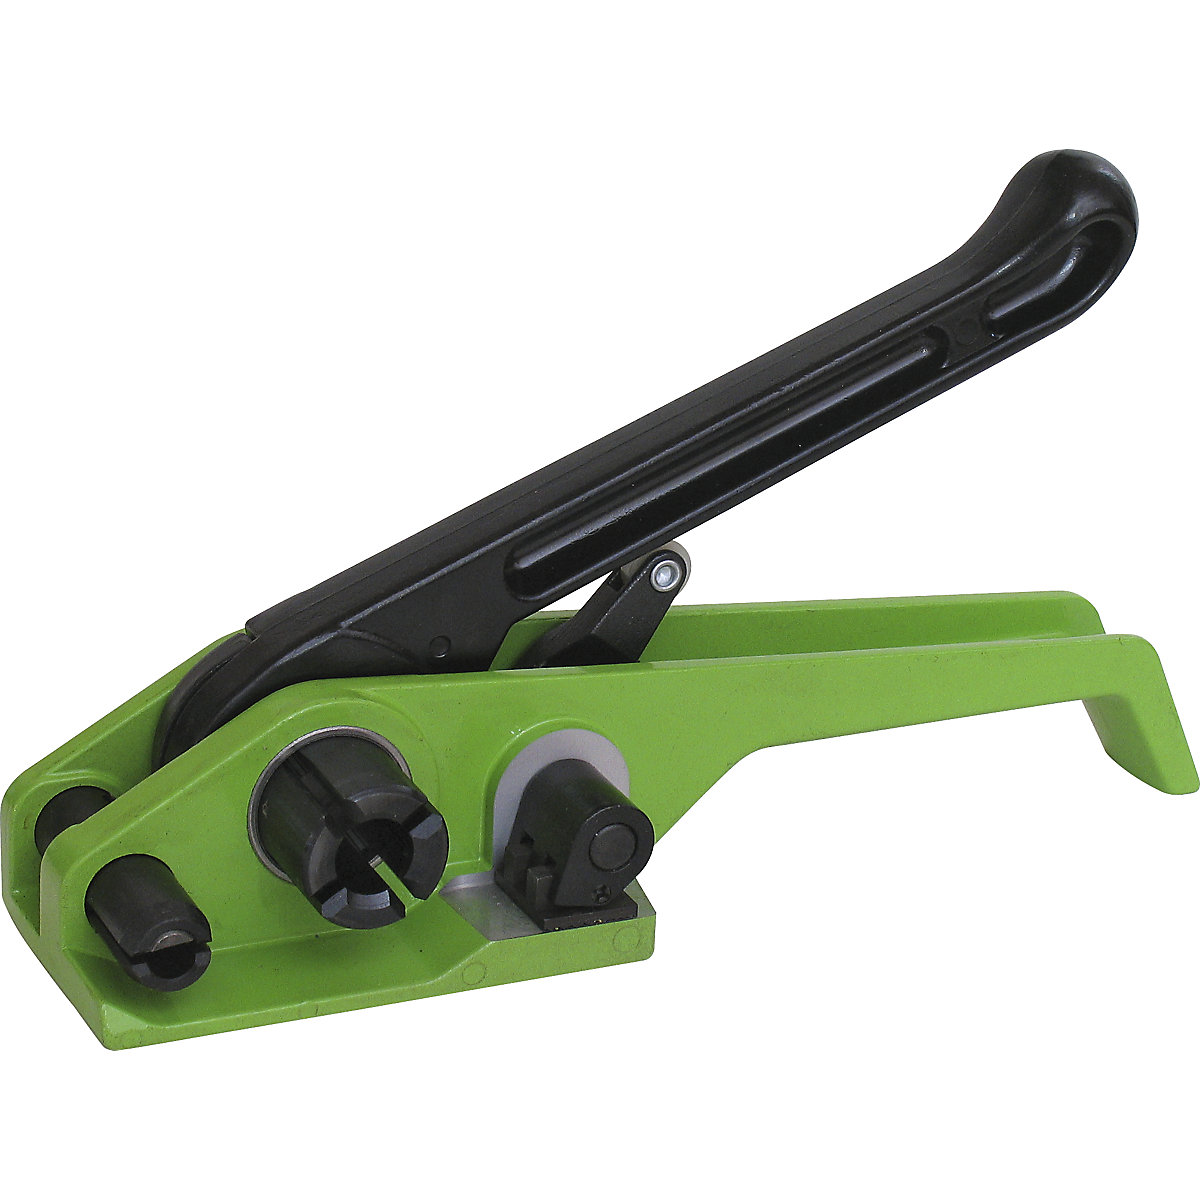 Tensioning tool for reinforced PET strapping